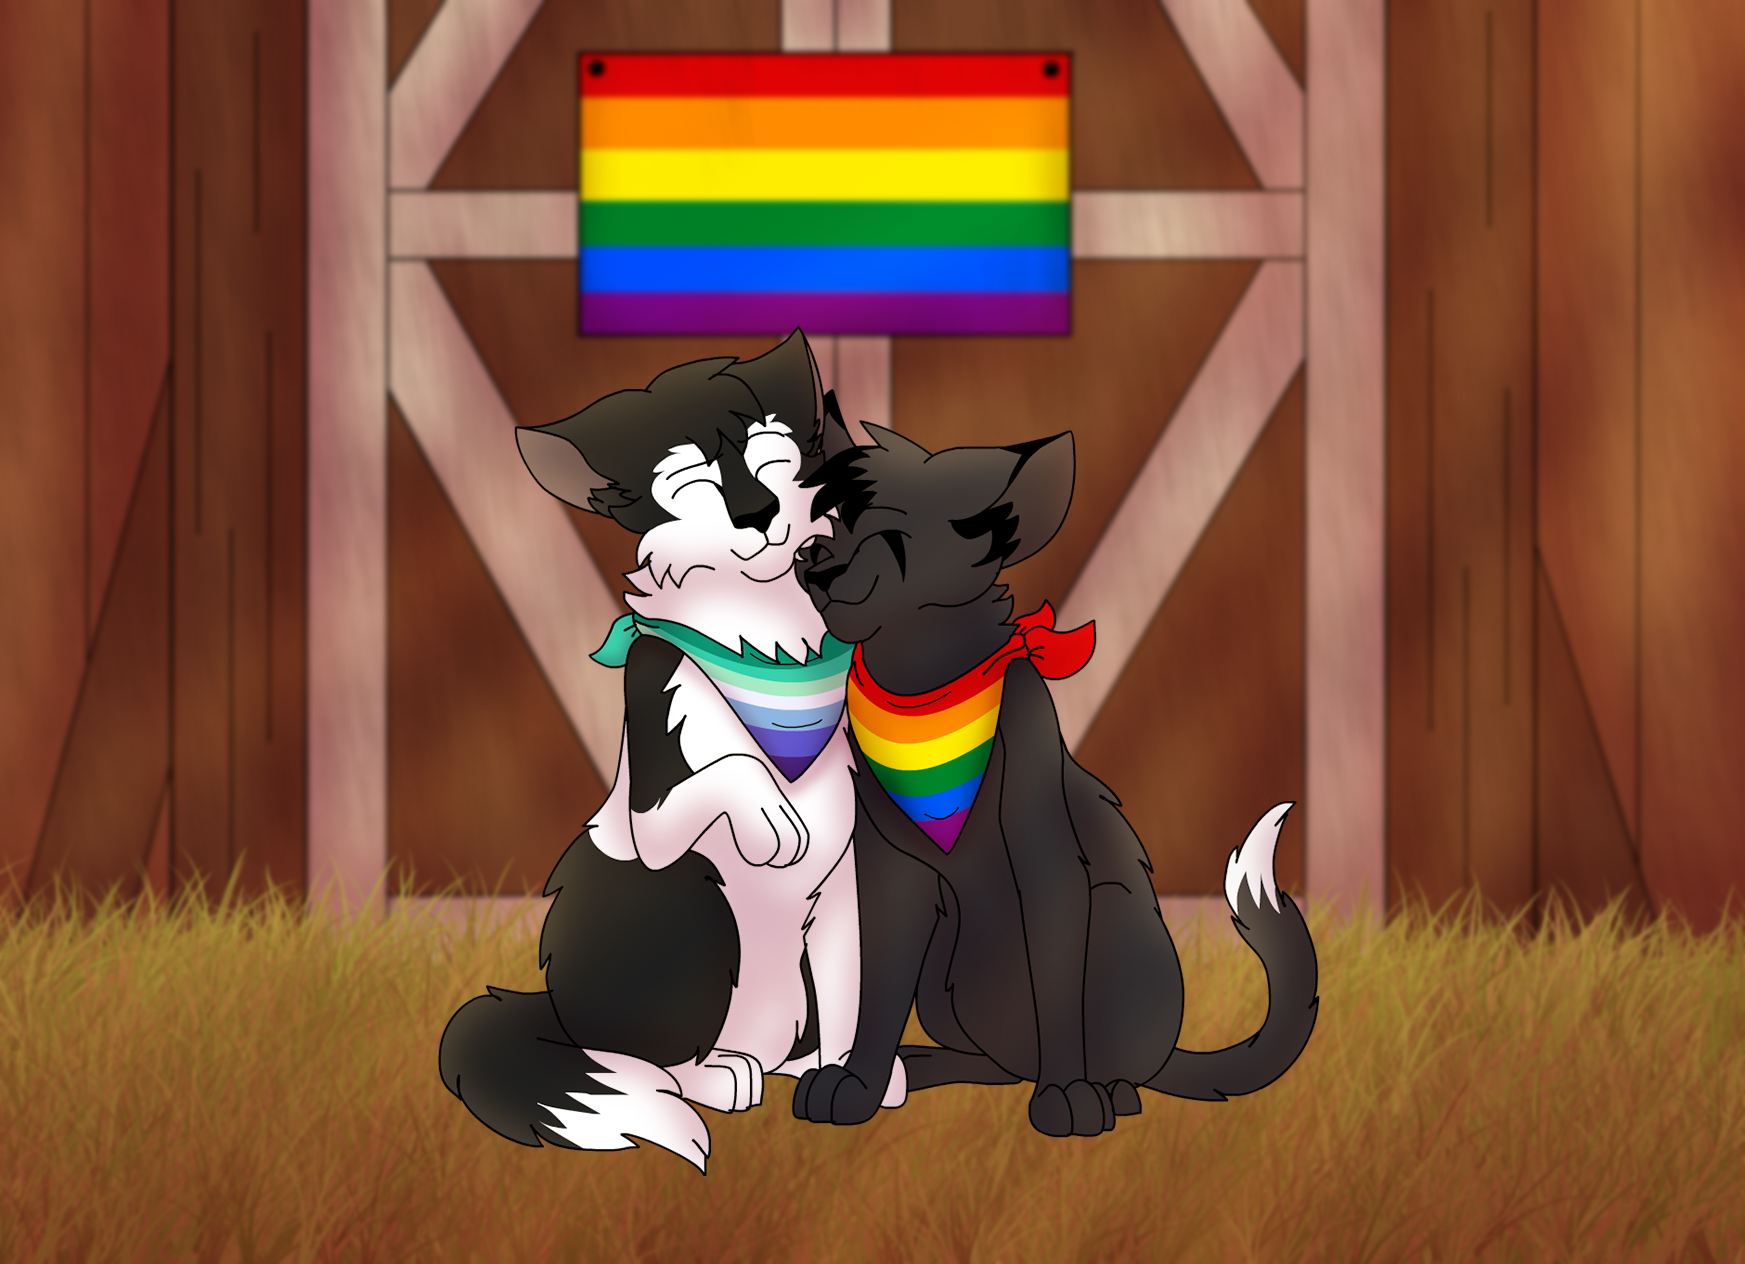 Ravenpaw and barley 💜 one of my favorite warrior cat relationships in 2023